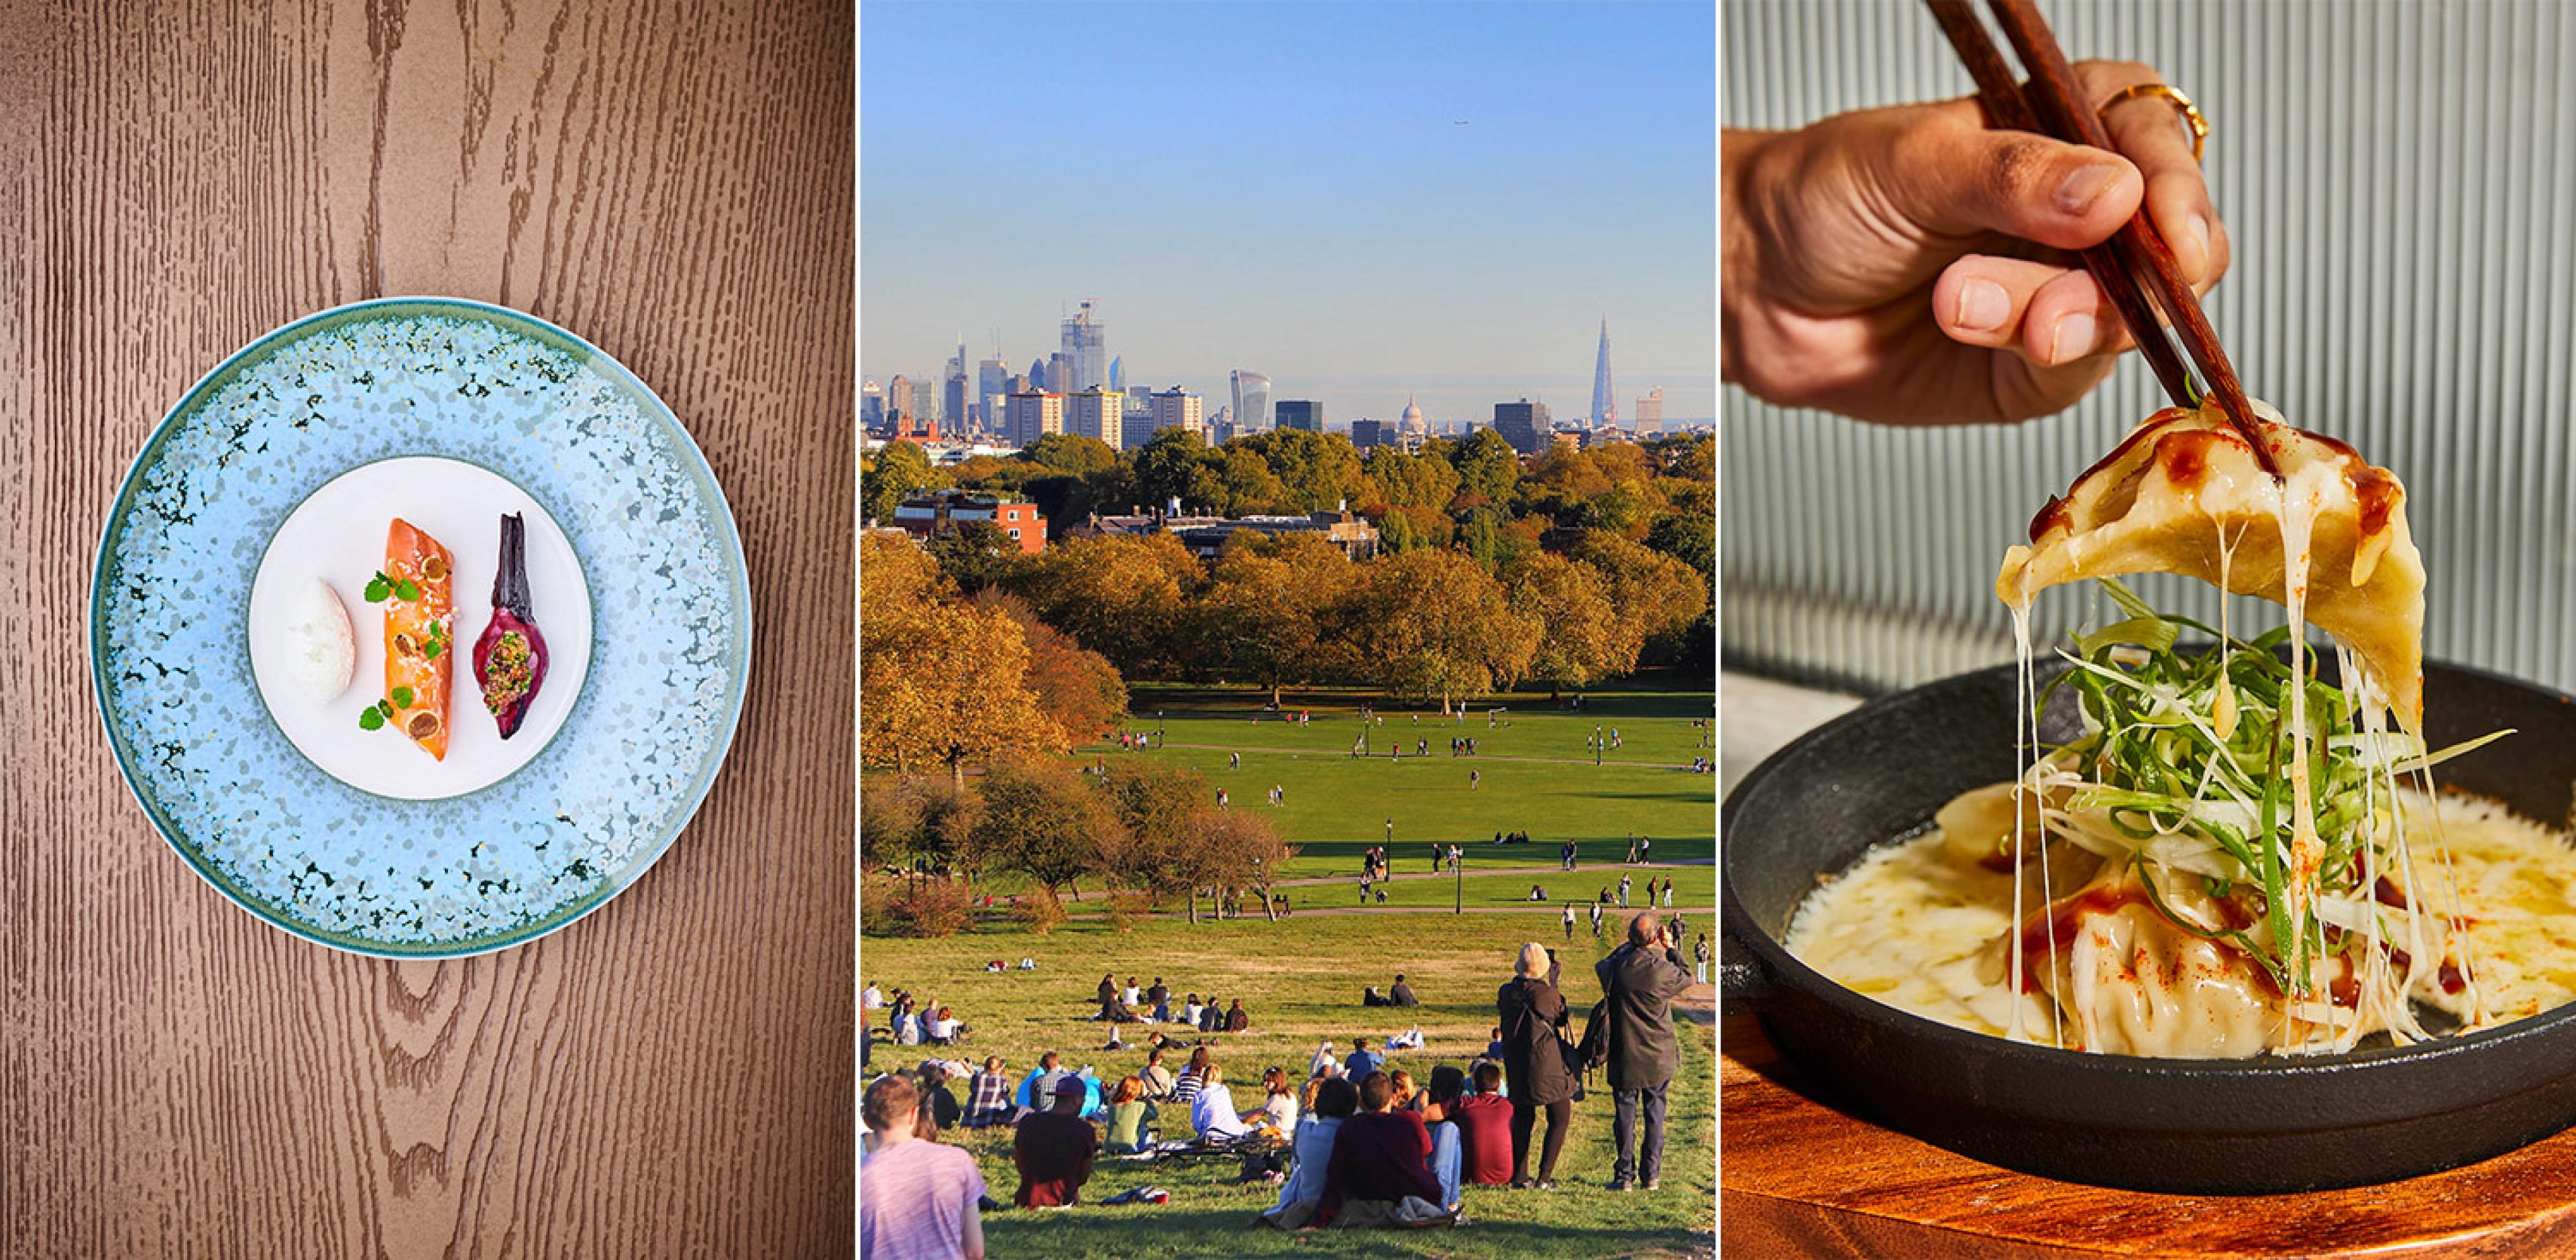 three photos: on left an overhead view of a blue and white plate with modern food on it; middle is a view of london skyline in the fall from a park; right is a hand picking up a.dumpling with chopsticks  that are dripping